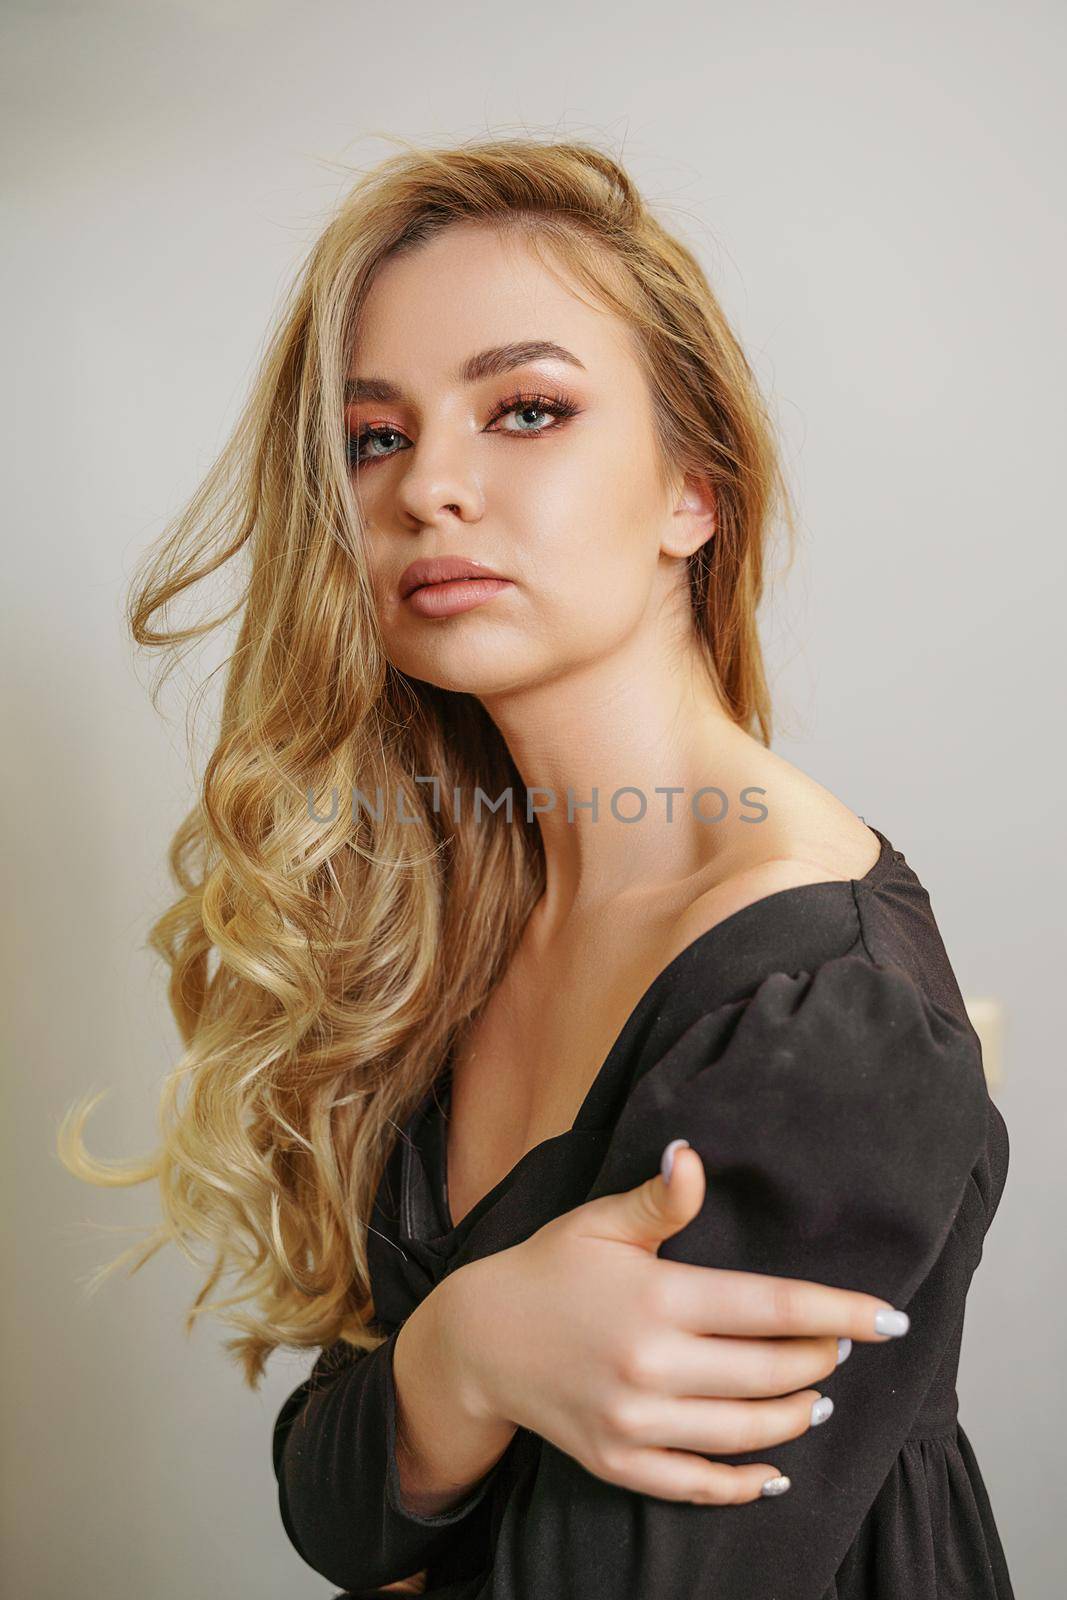 Beautiful young blonde woman face closeup portrait in studio on a light background.